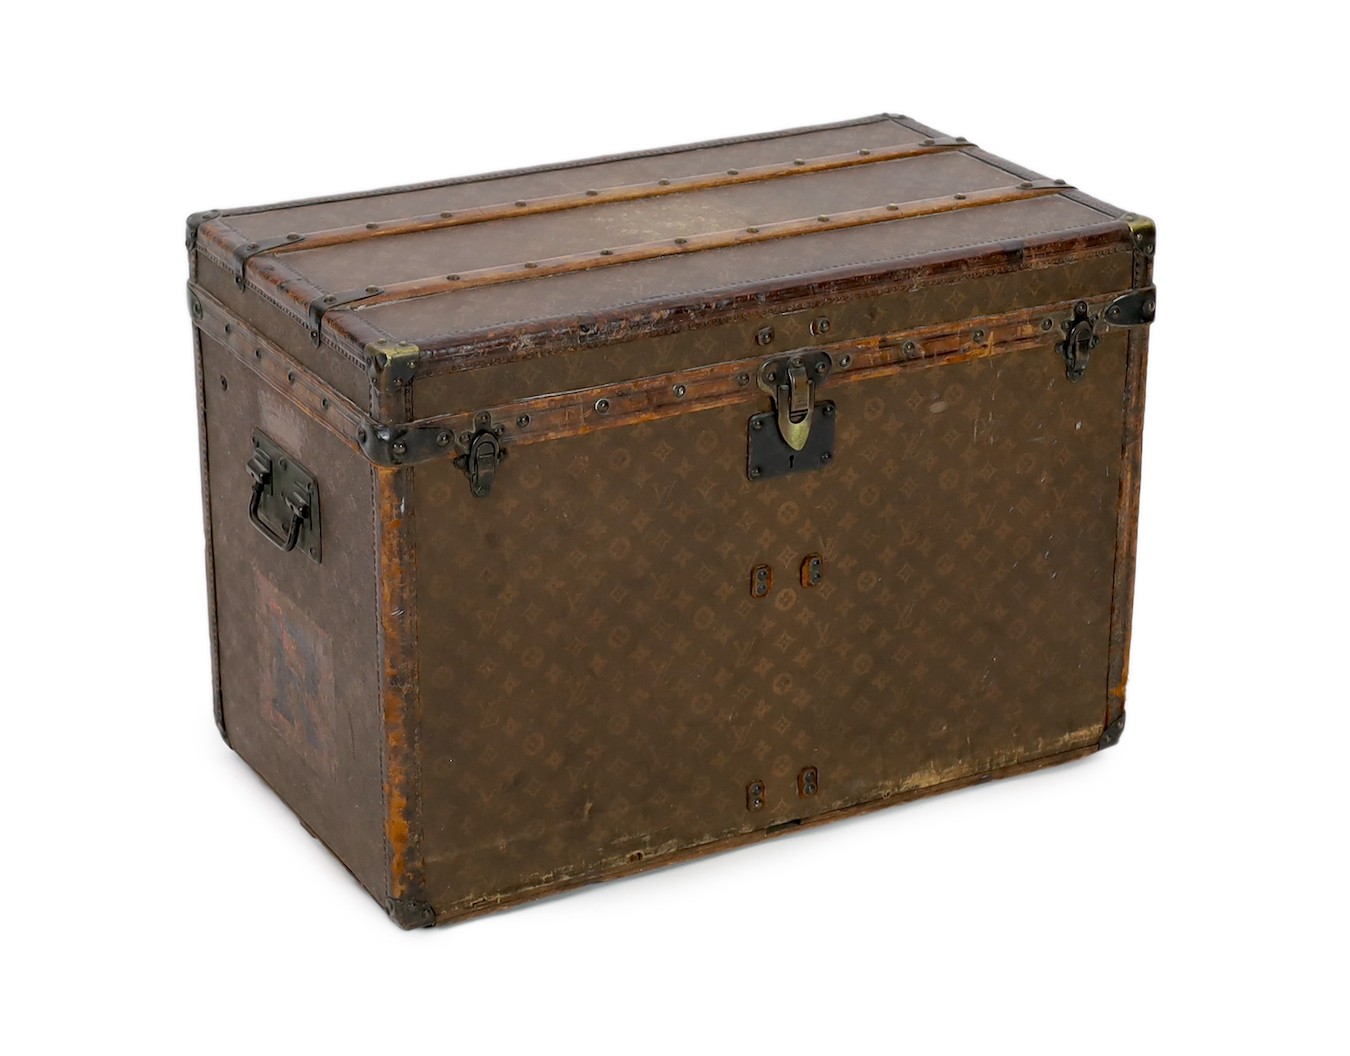 A Louis Vuitton brass mounted leather bound trunk, c.1910, numbered 137426, 75cm wide, 43cm deep, 54cm high                                                                                                                 